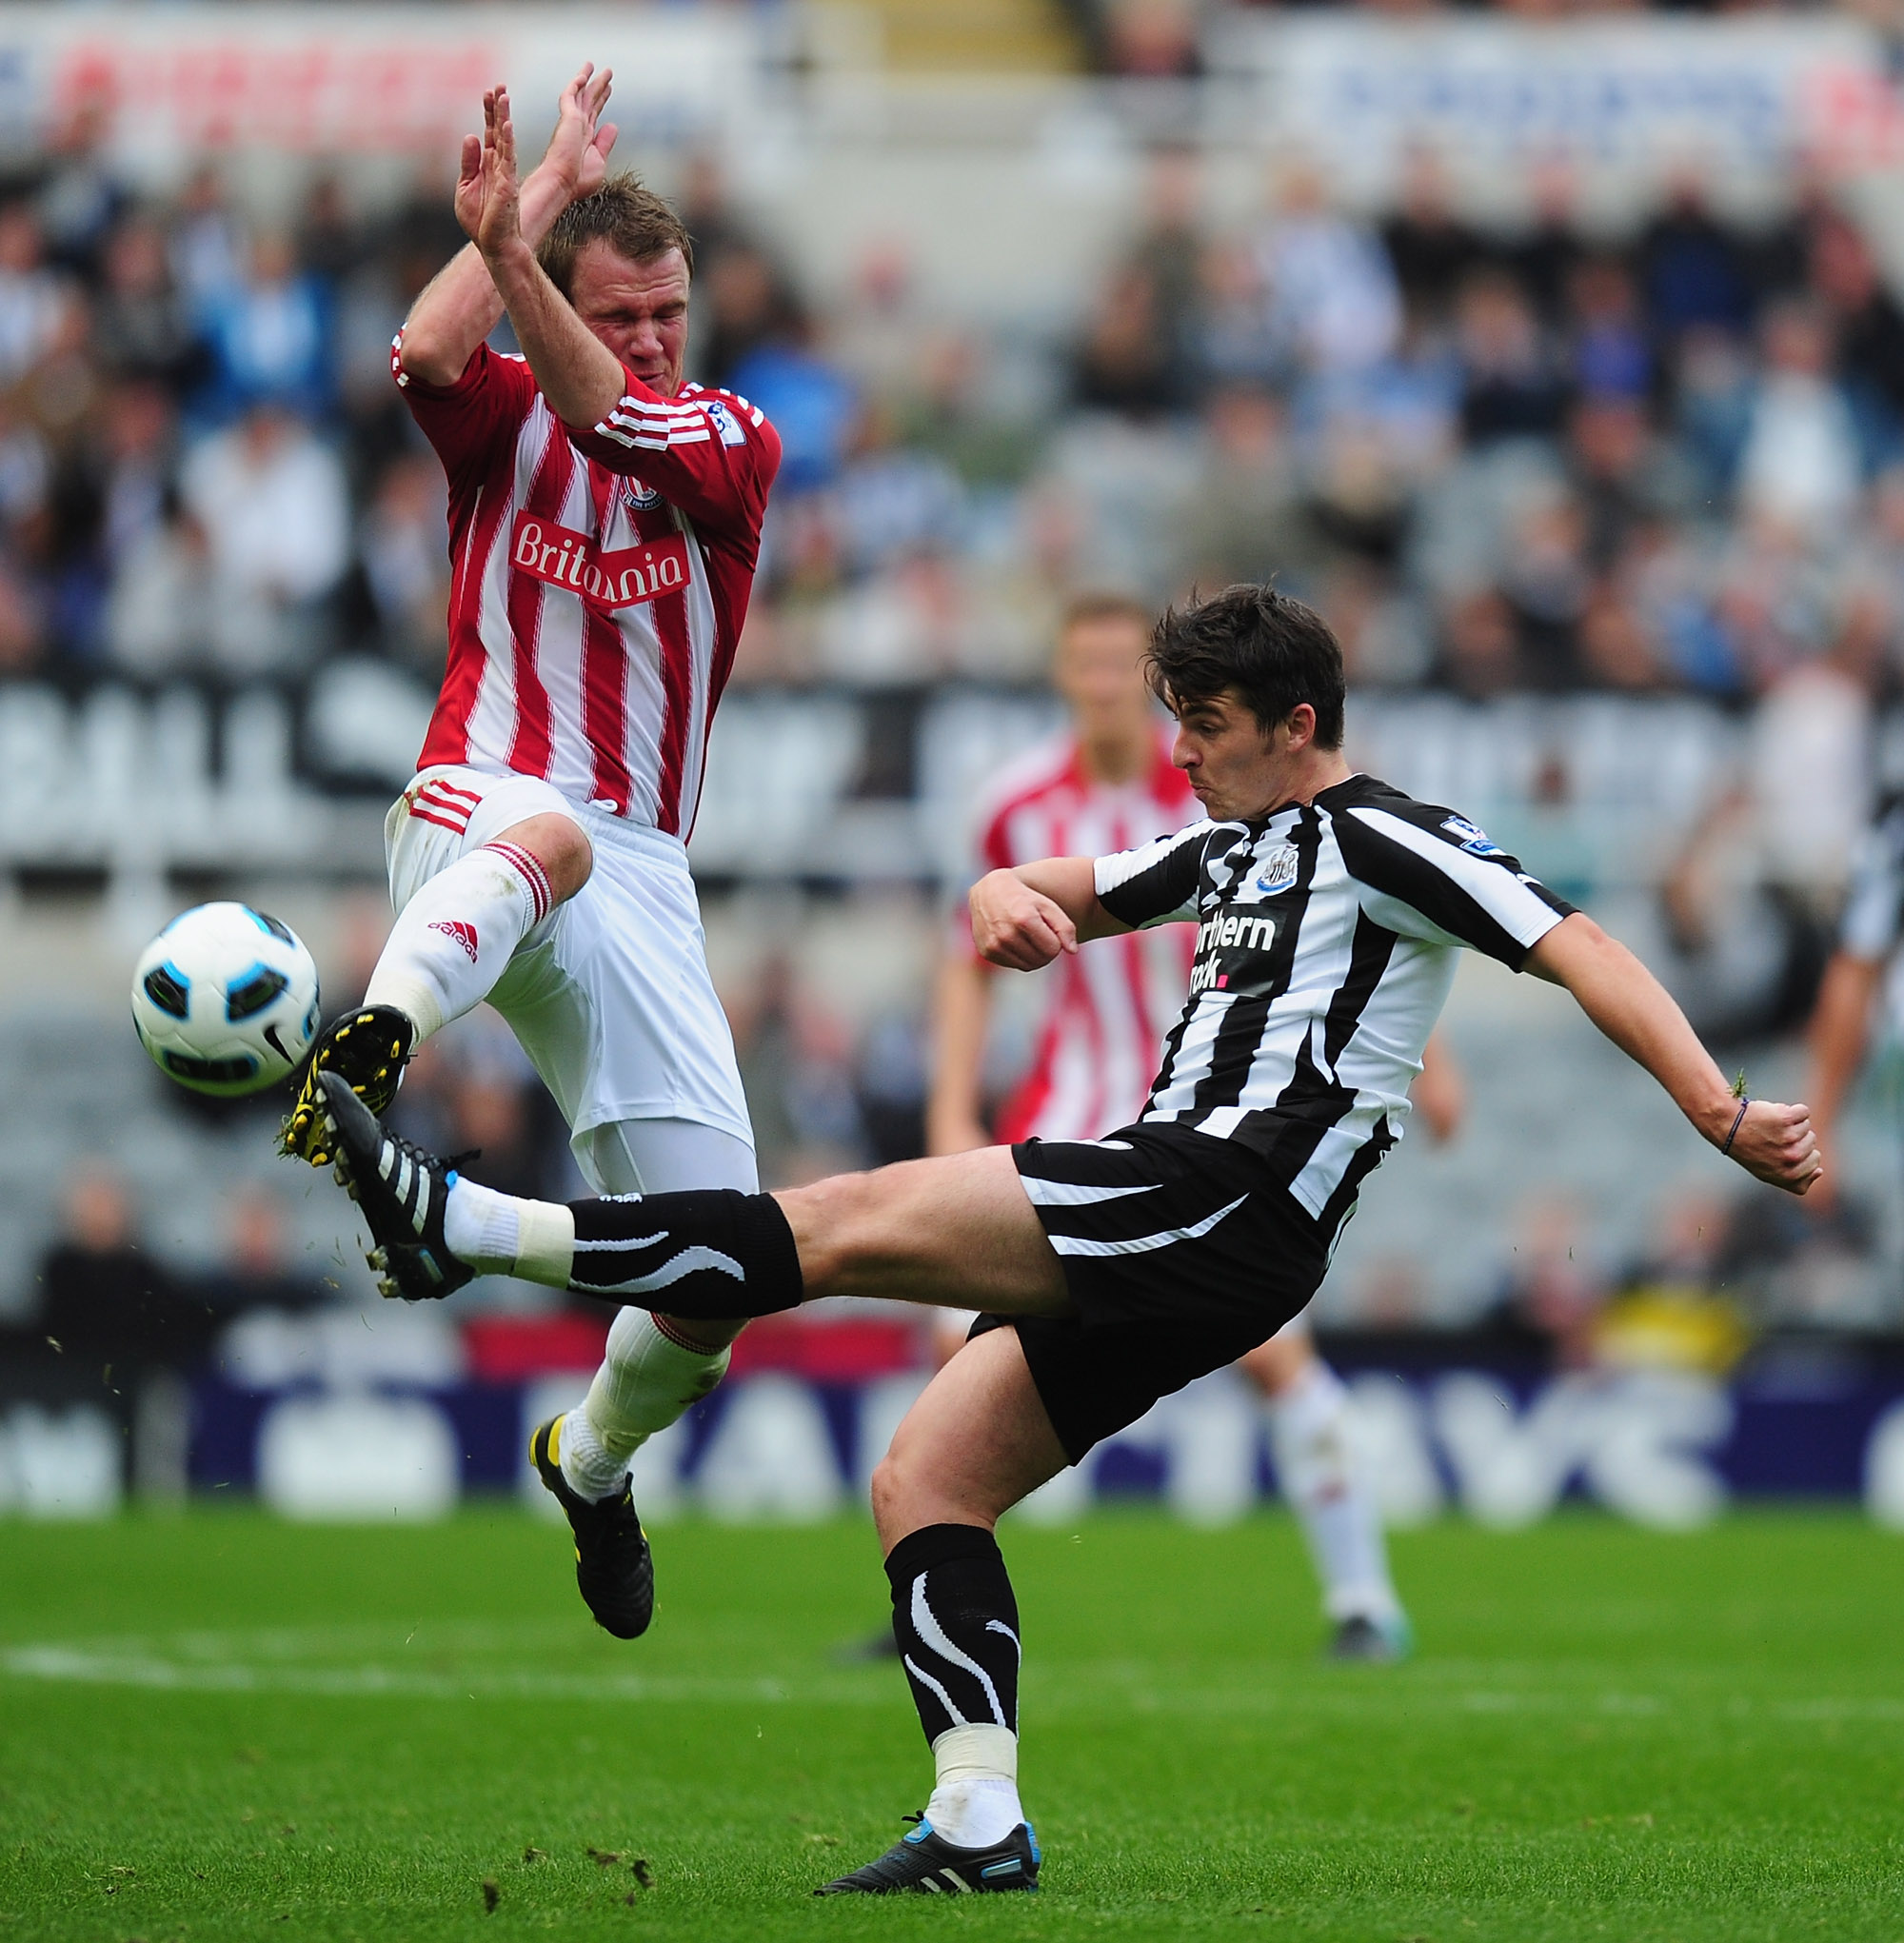 NEWCASTLE UPON TYNE, ENGLAND - SEPTEMBER 26:  Joey Barton of Newcastle United is challenged by Glen Whelan of Stoke City during the Barclays Premier League match between Newcastle United and Stoke City at St James' Park on September 26, 2010 in Newcastle 